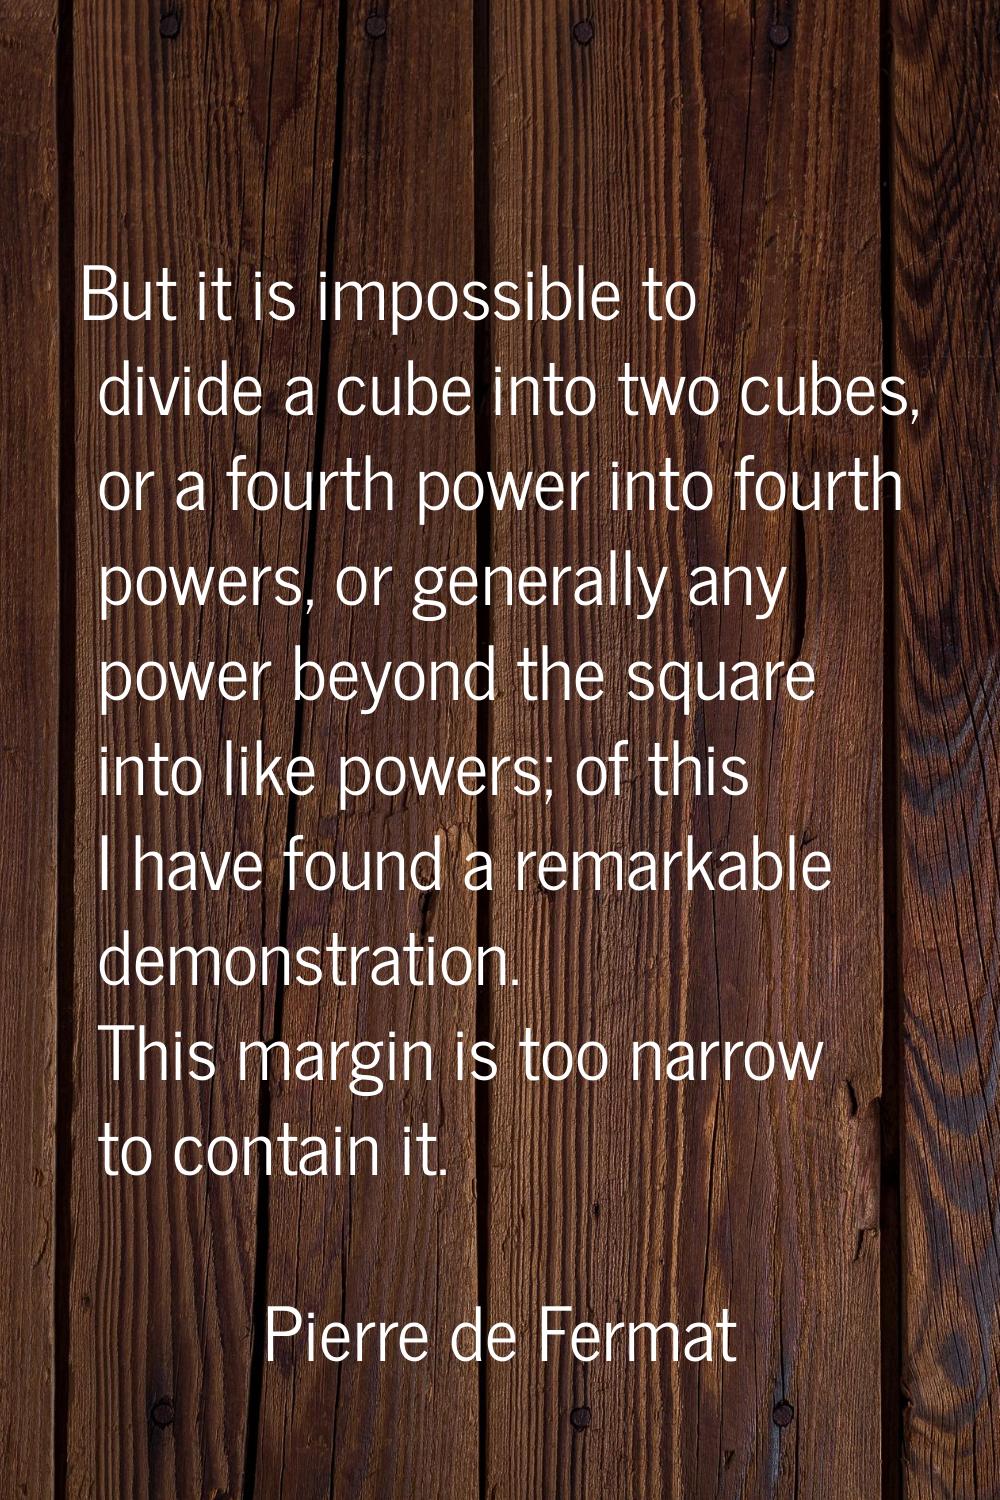 But it is impossible to divide a cube into two cubes, or a fourth power into fourth powers, or gene